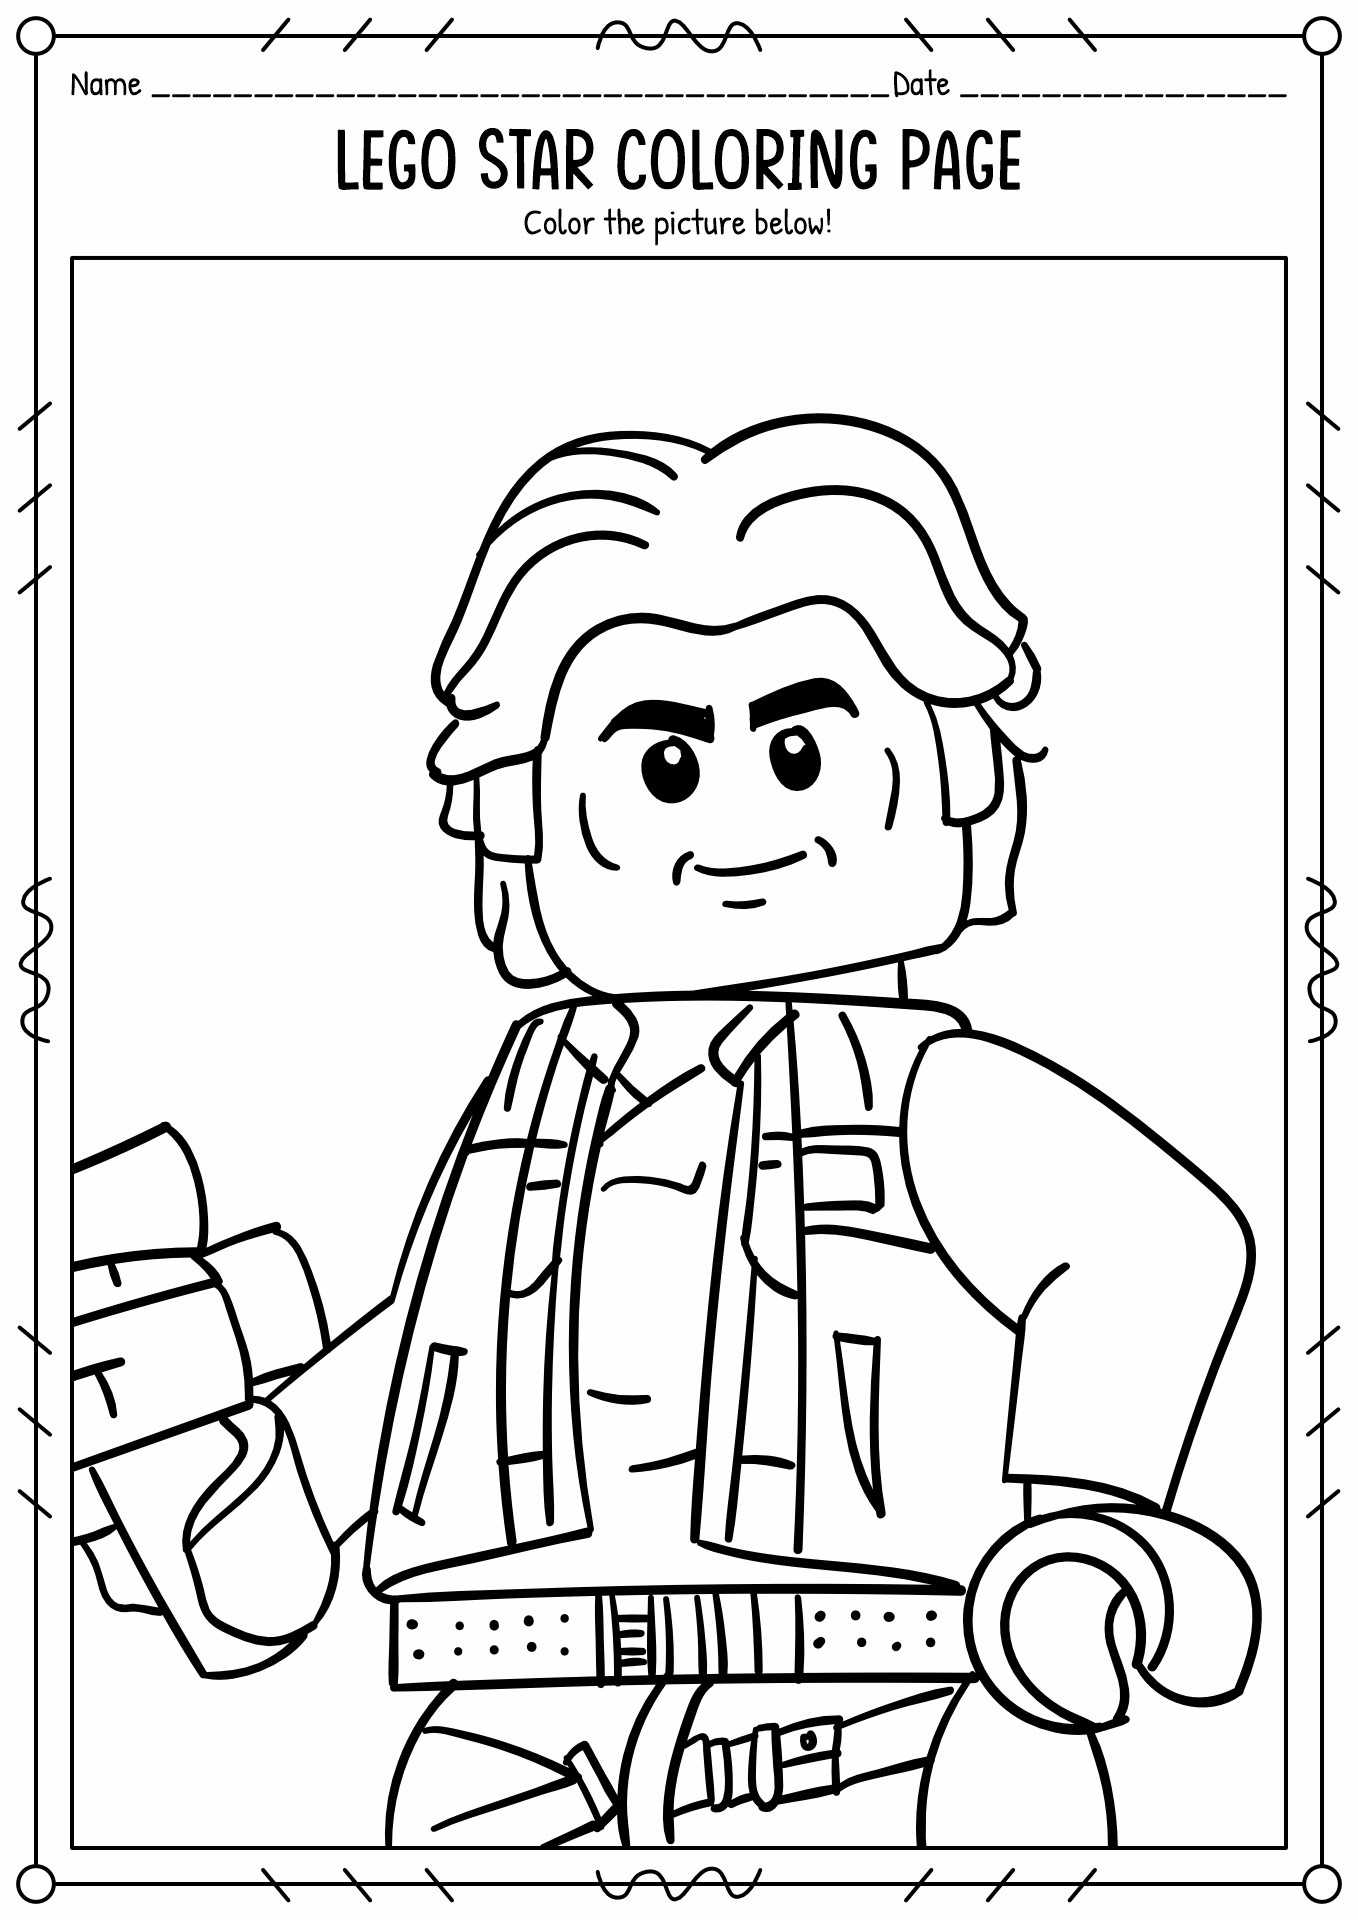 LEGO Star Coloring Pages